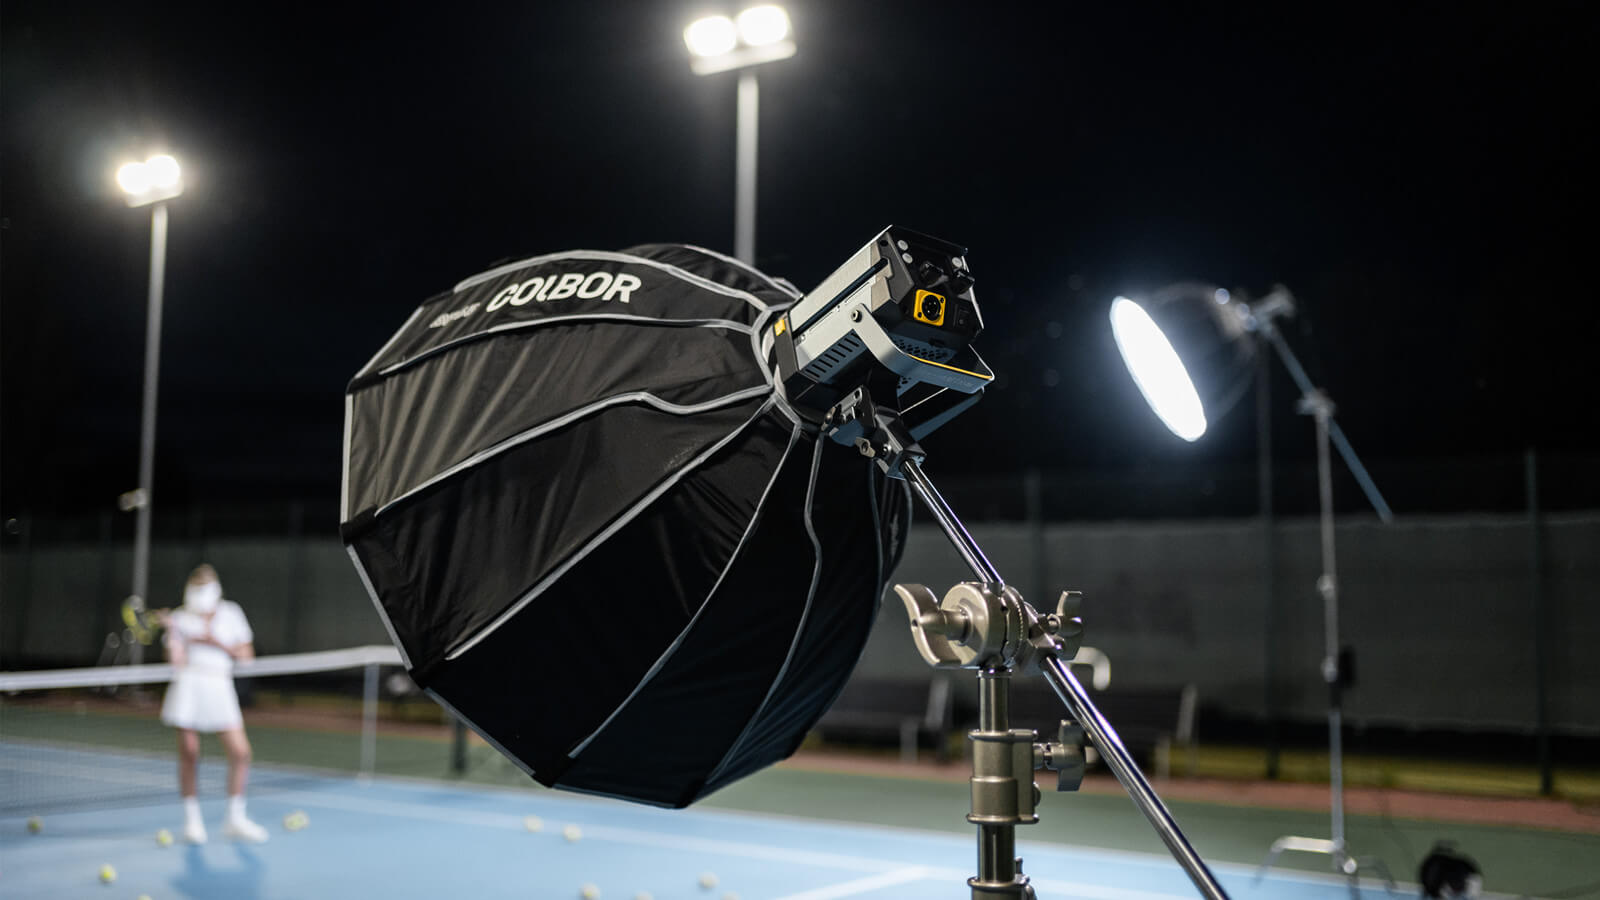 COLBOR LED lights for video are used with softbox to illuminate the scene for video making.